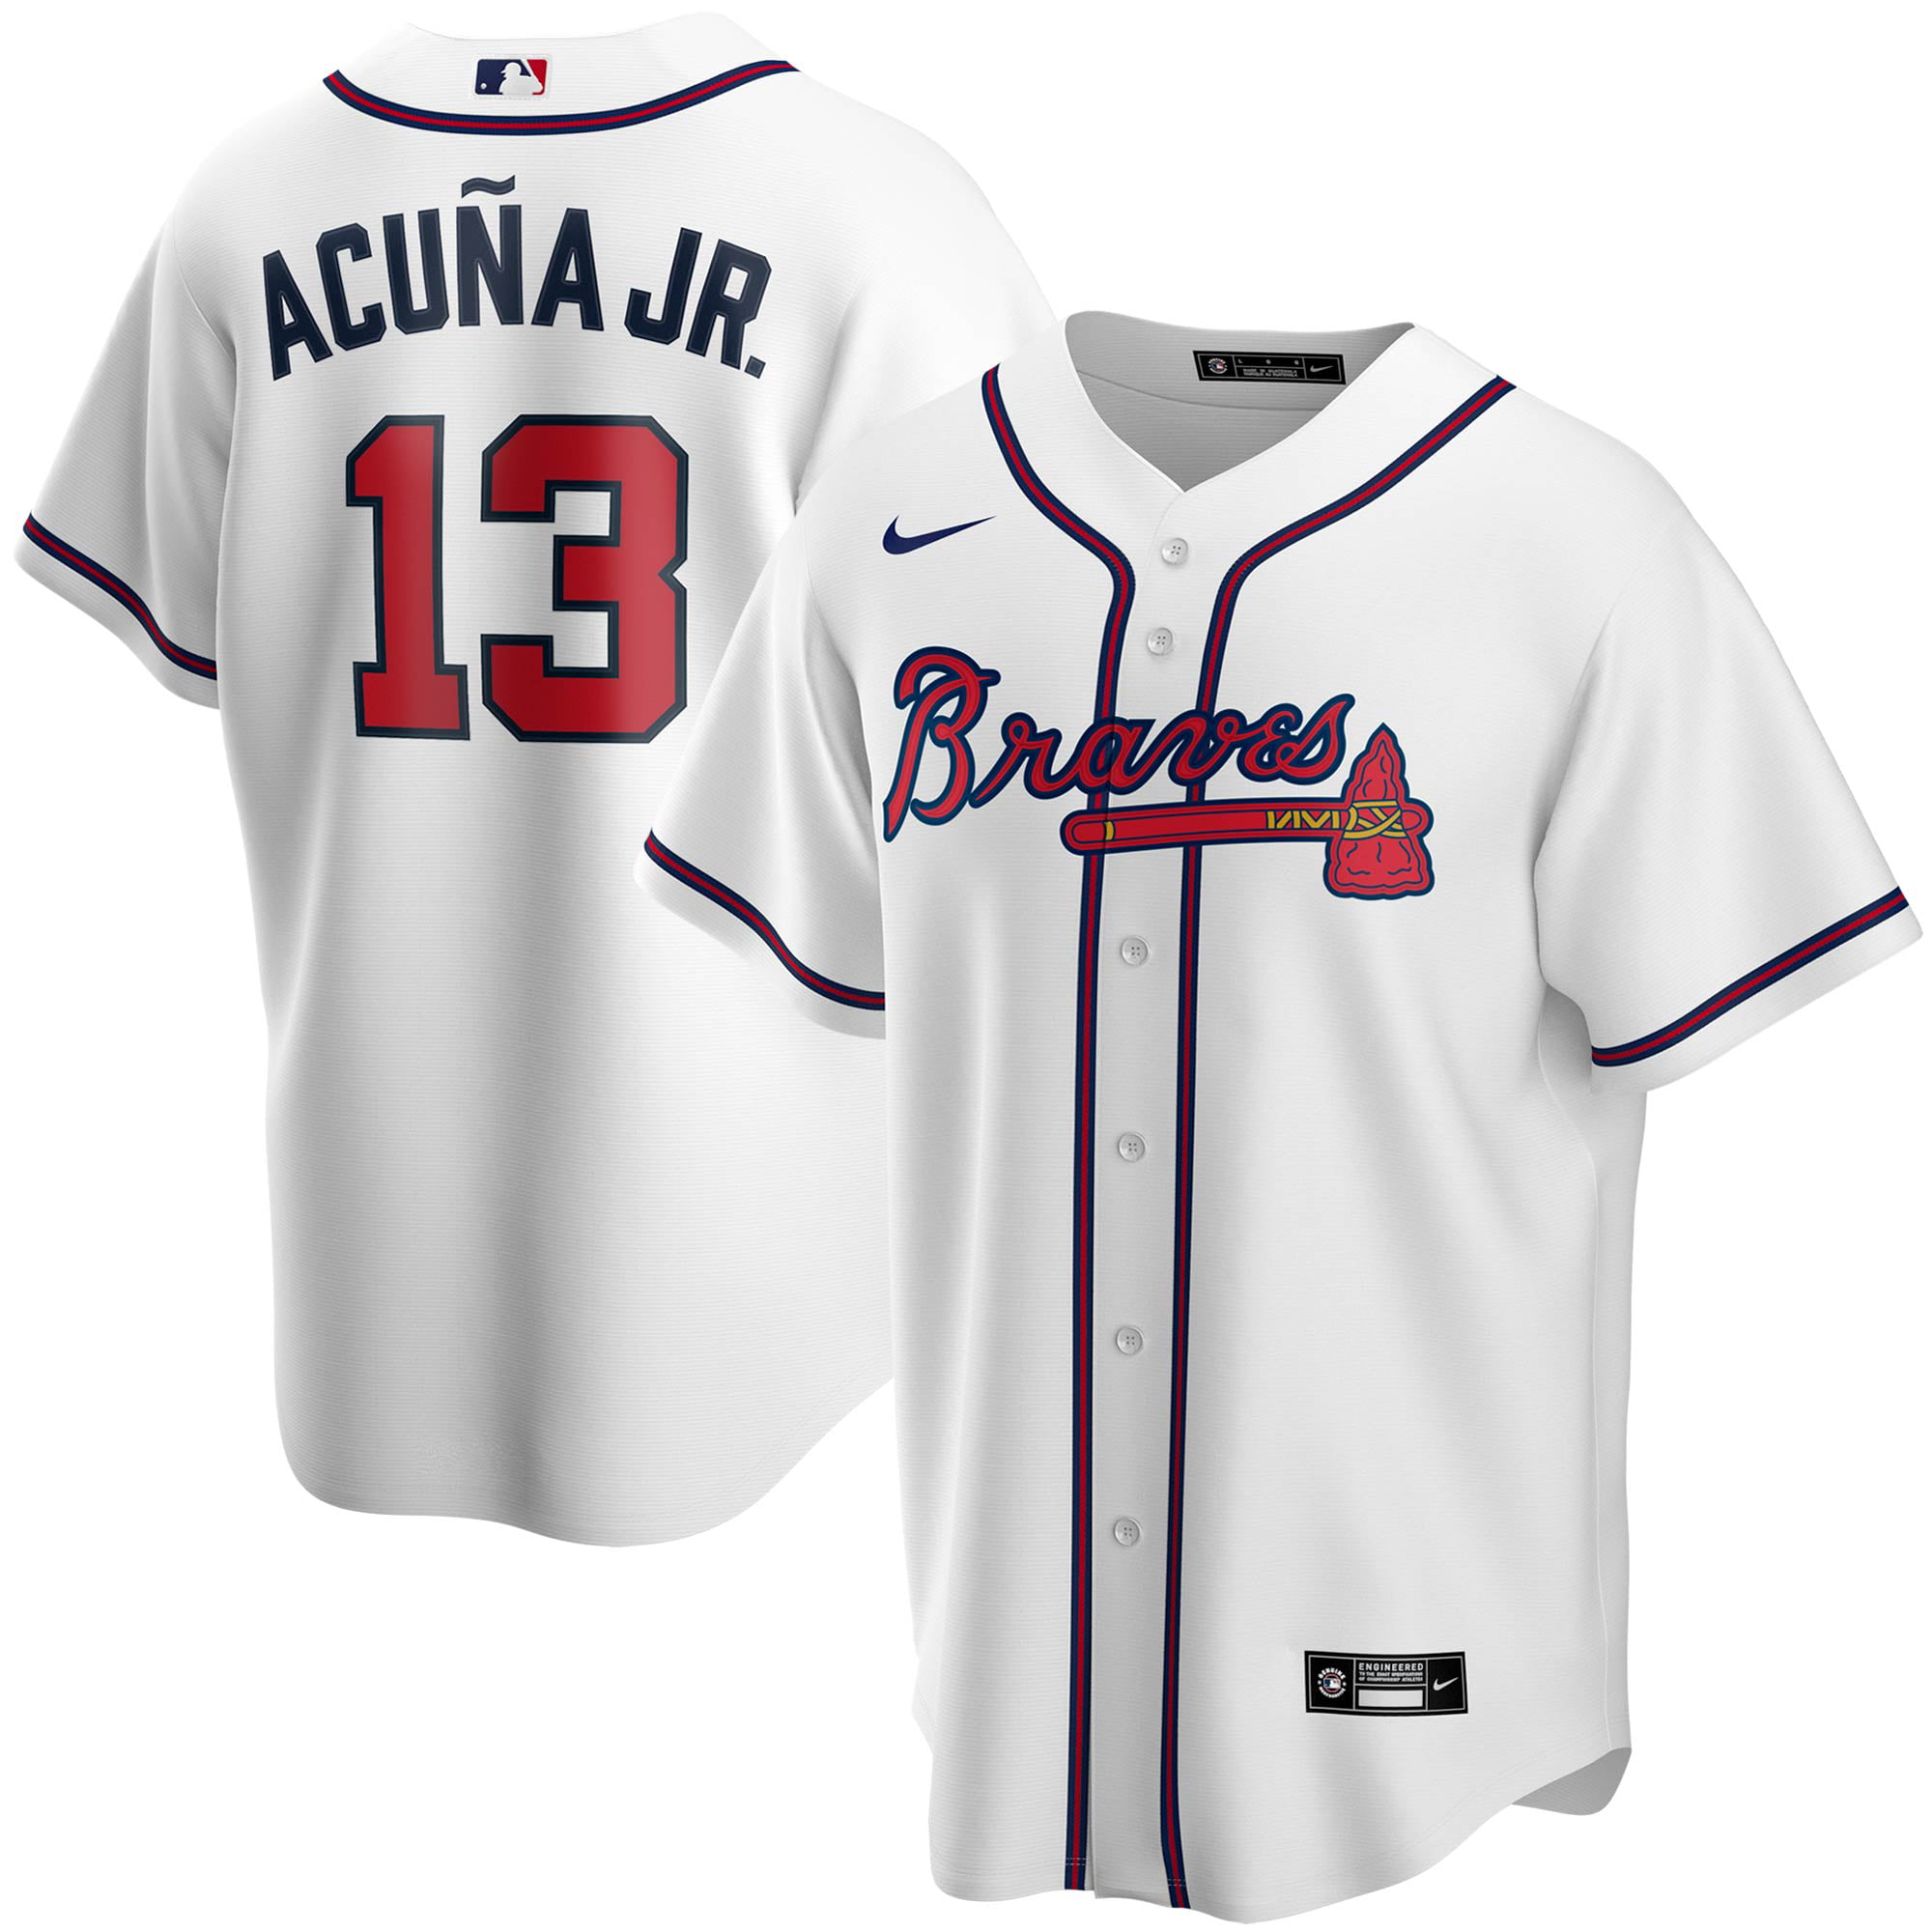 acuna jersey youth